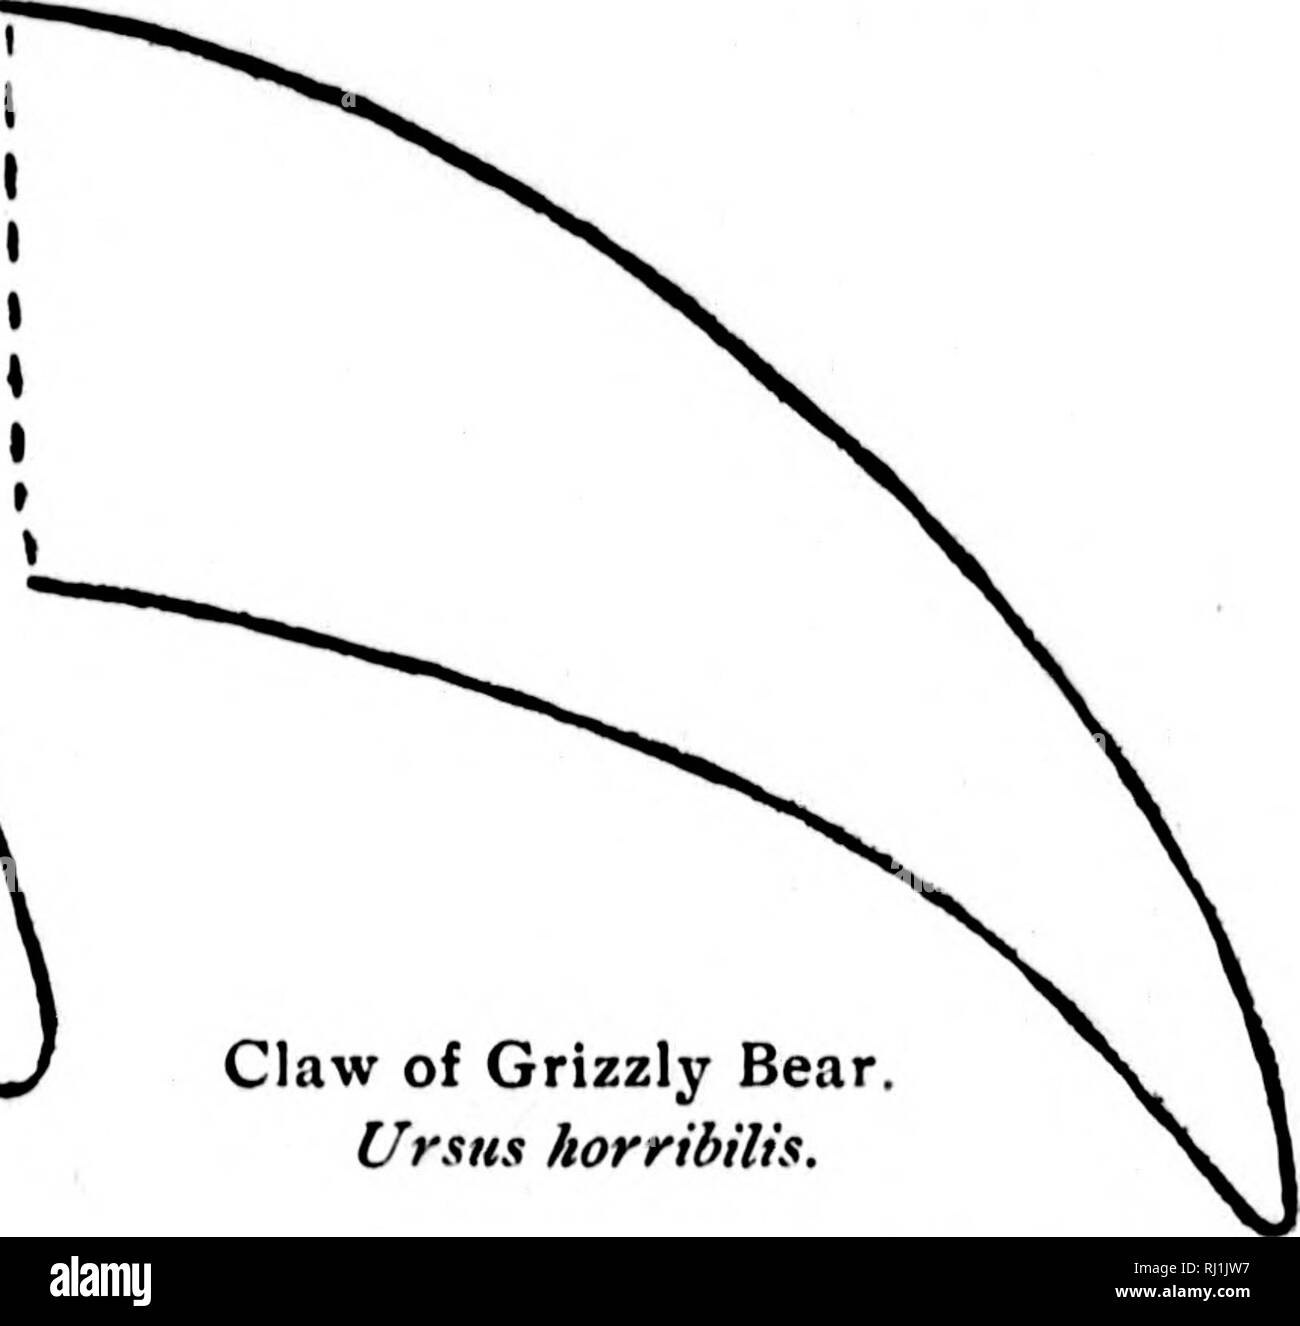 . Explorations in the far North [microform] : being a report of an expedition under the auspices of the University of Iowa during the years 1892, '93, and '94. Inuit; Natural history; Inuit; Sciences naturelles. Claw of Polar Bear. Tkalarctos marttimus. Ursus horribilis Ord.. Claw of Grizzly Bear. Ursus horribilis. Grizzly Bear. The Loucheux look upon the grizzly with dread and often fire repeatedly at the lifeless carcass, as experience has shown them that the grizzly sometimes recovers from the shock and attacks the unwary hunter. After killing one of this species, while traversing the delta Stock Photo